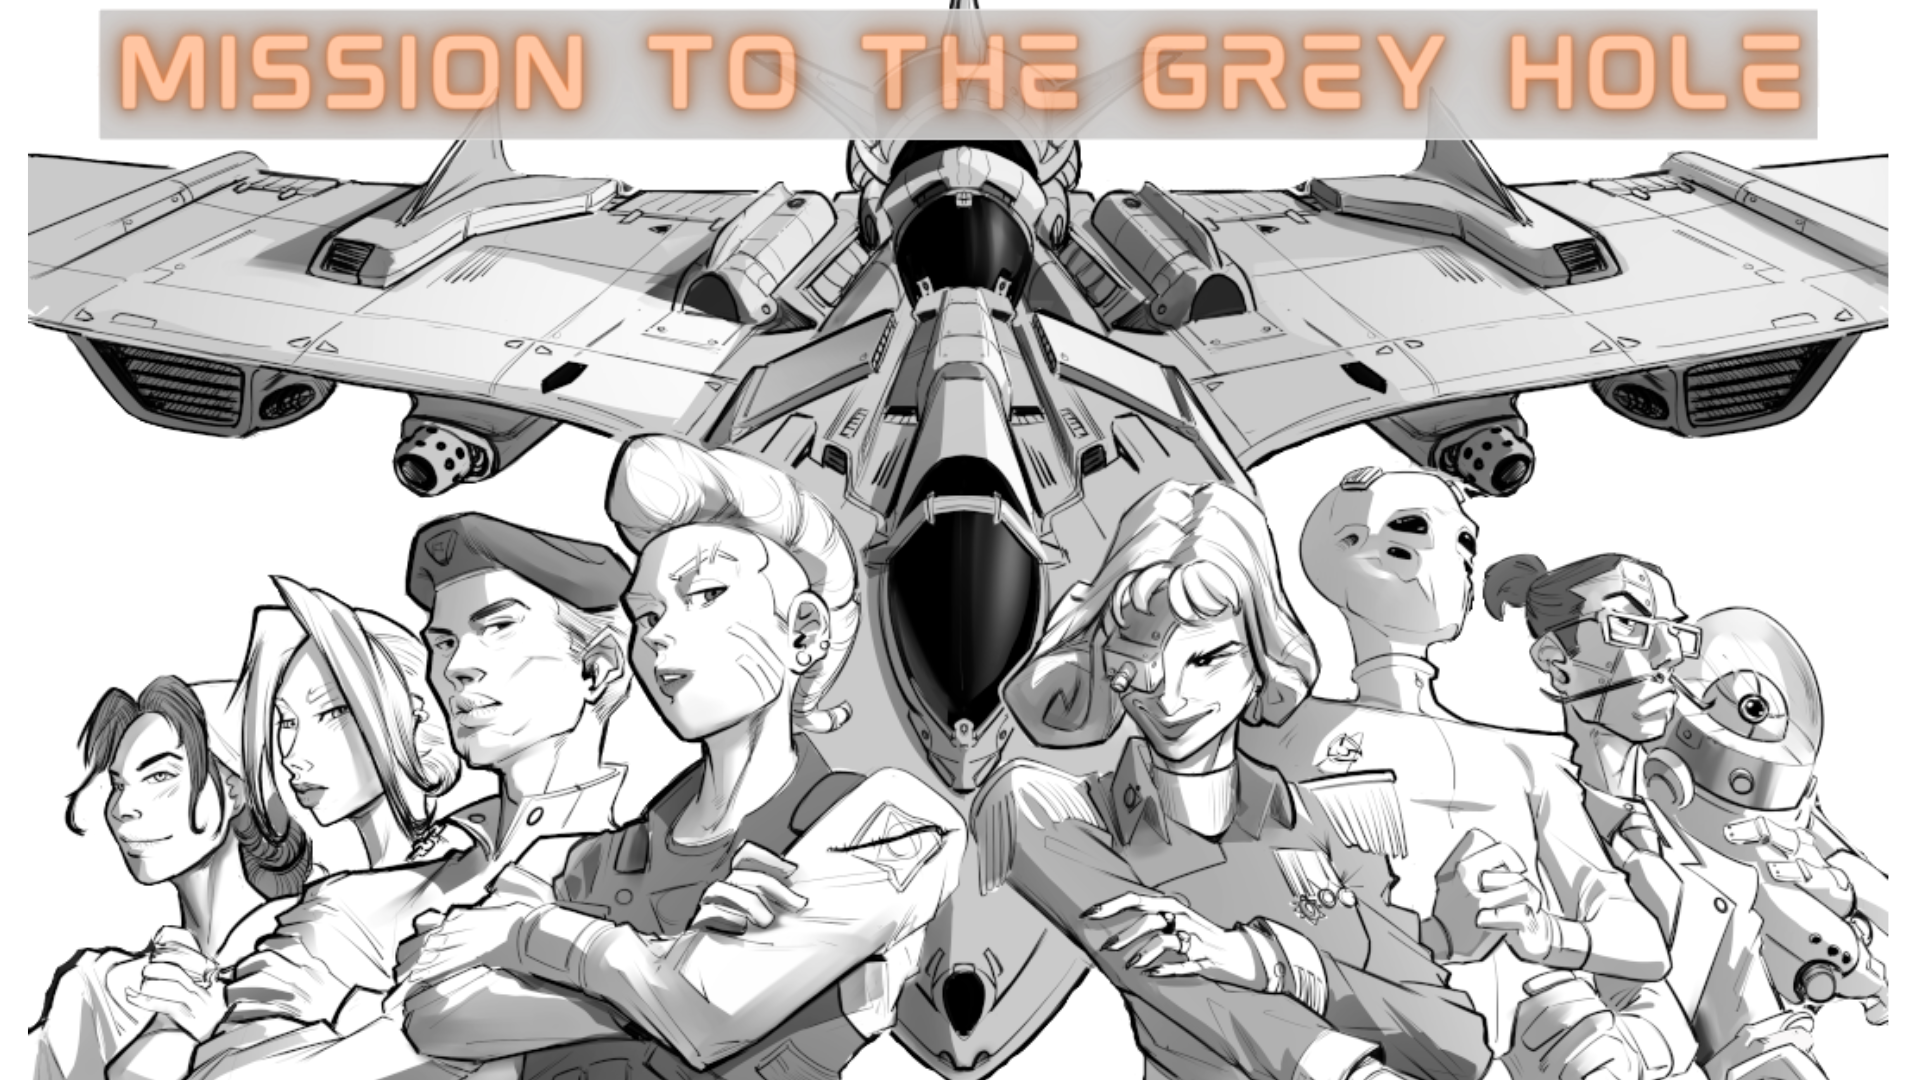 Mission to the Grey Hole